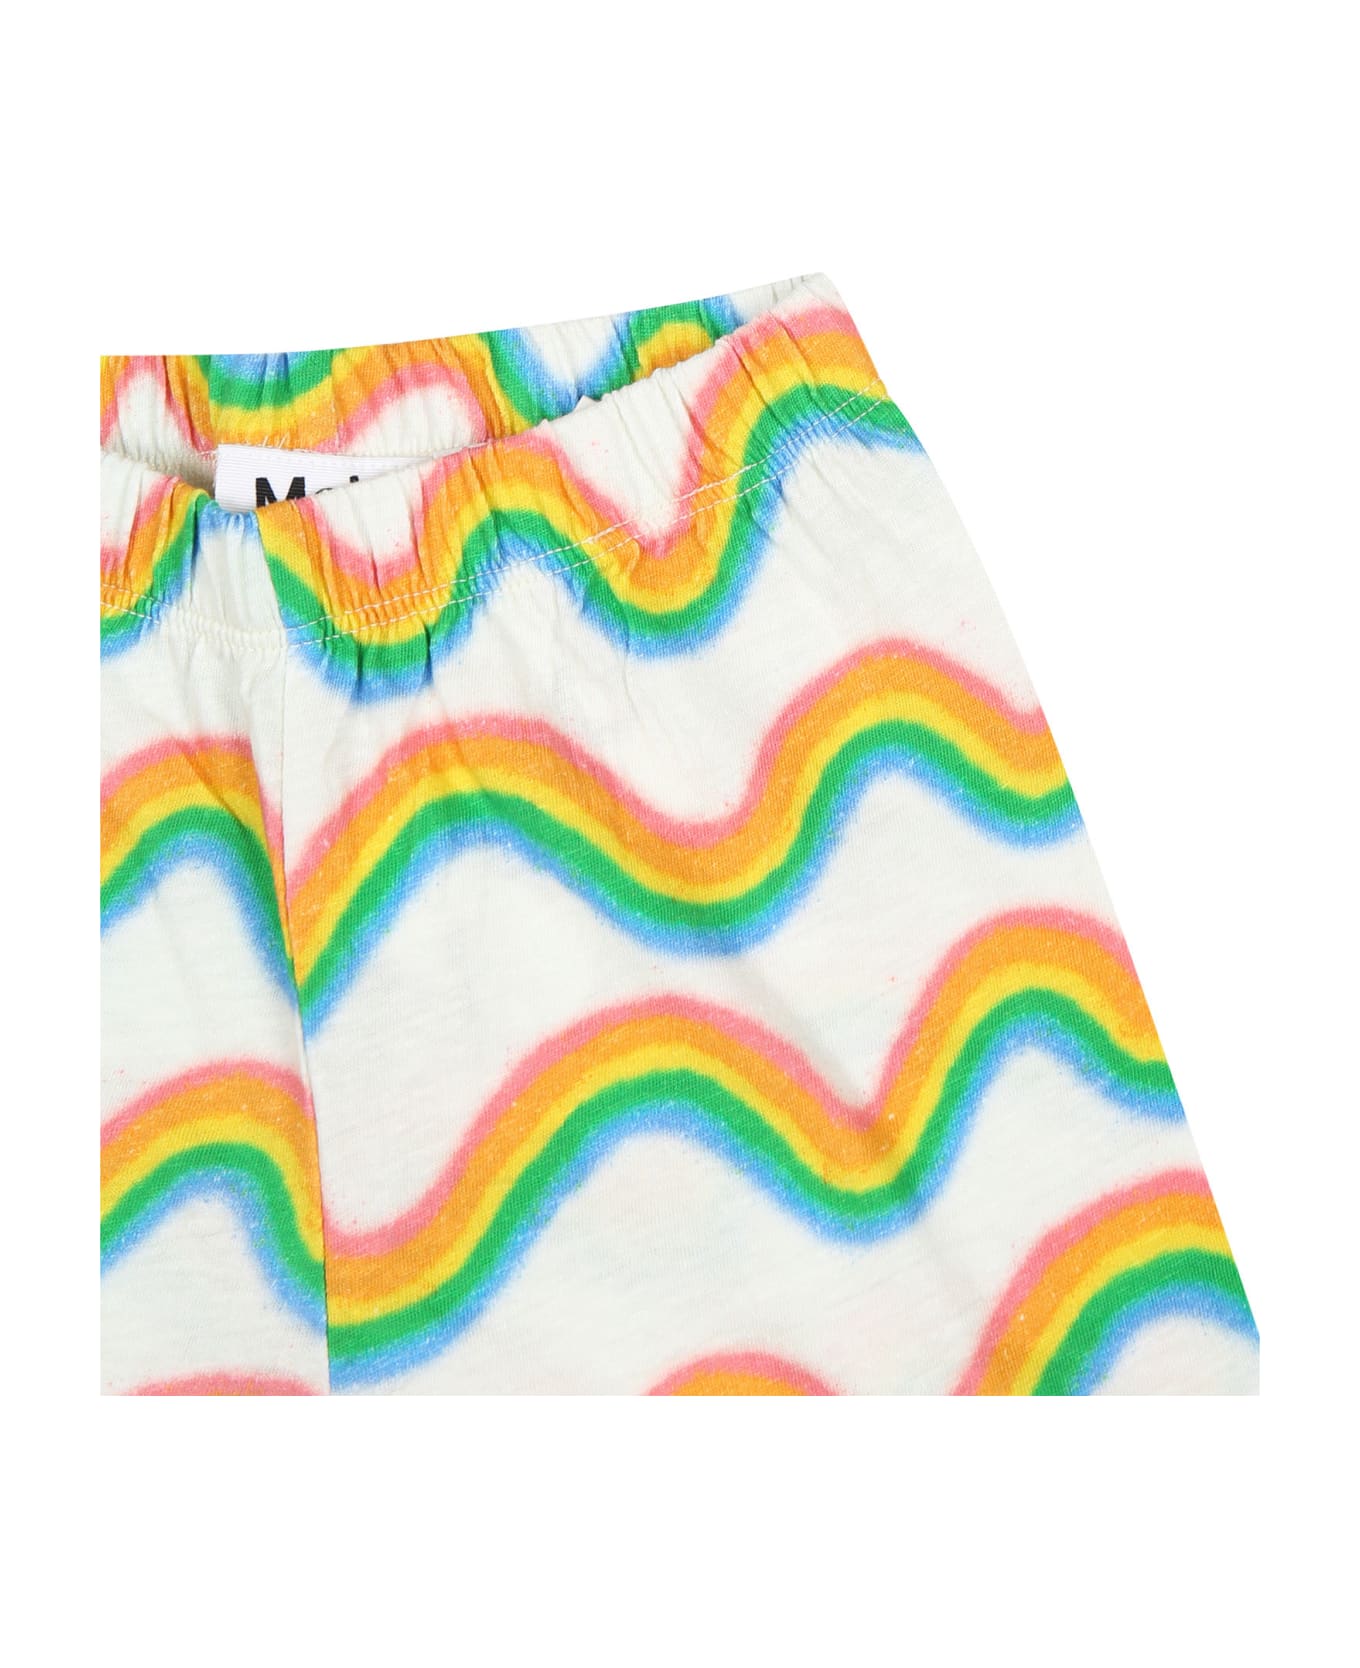 Molo White Trousers For Baby Girl With Rainbow Print - Multicolor ボトムス